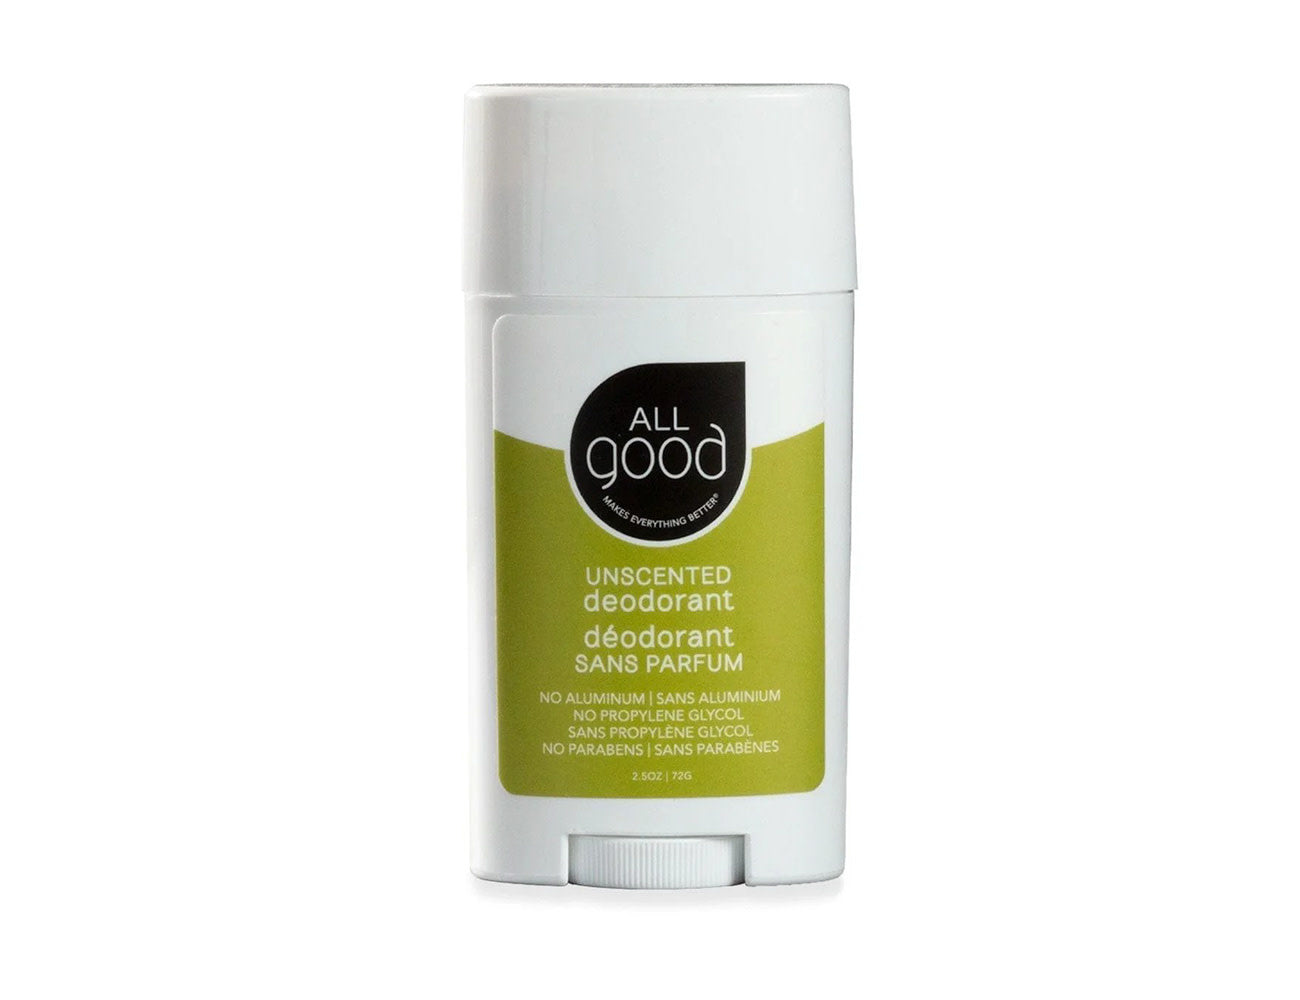 All Good Deodorant, Unscented